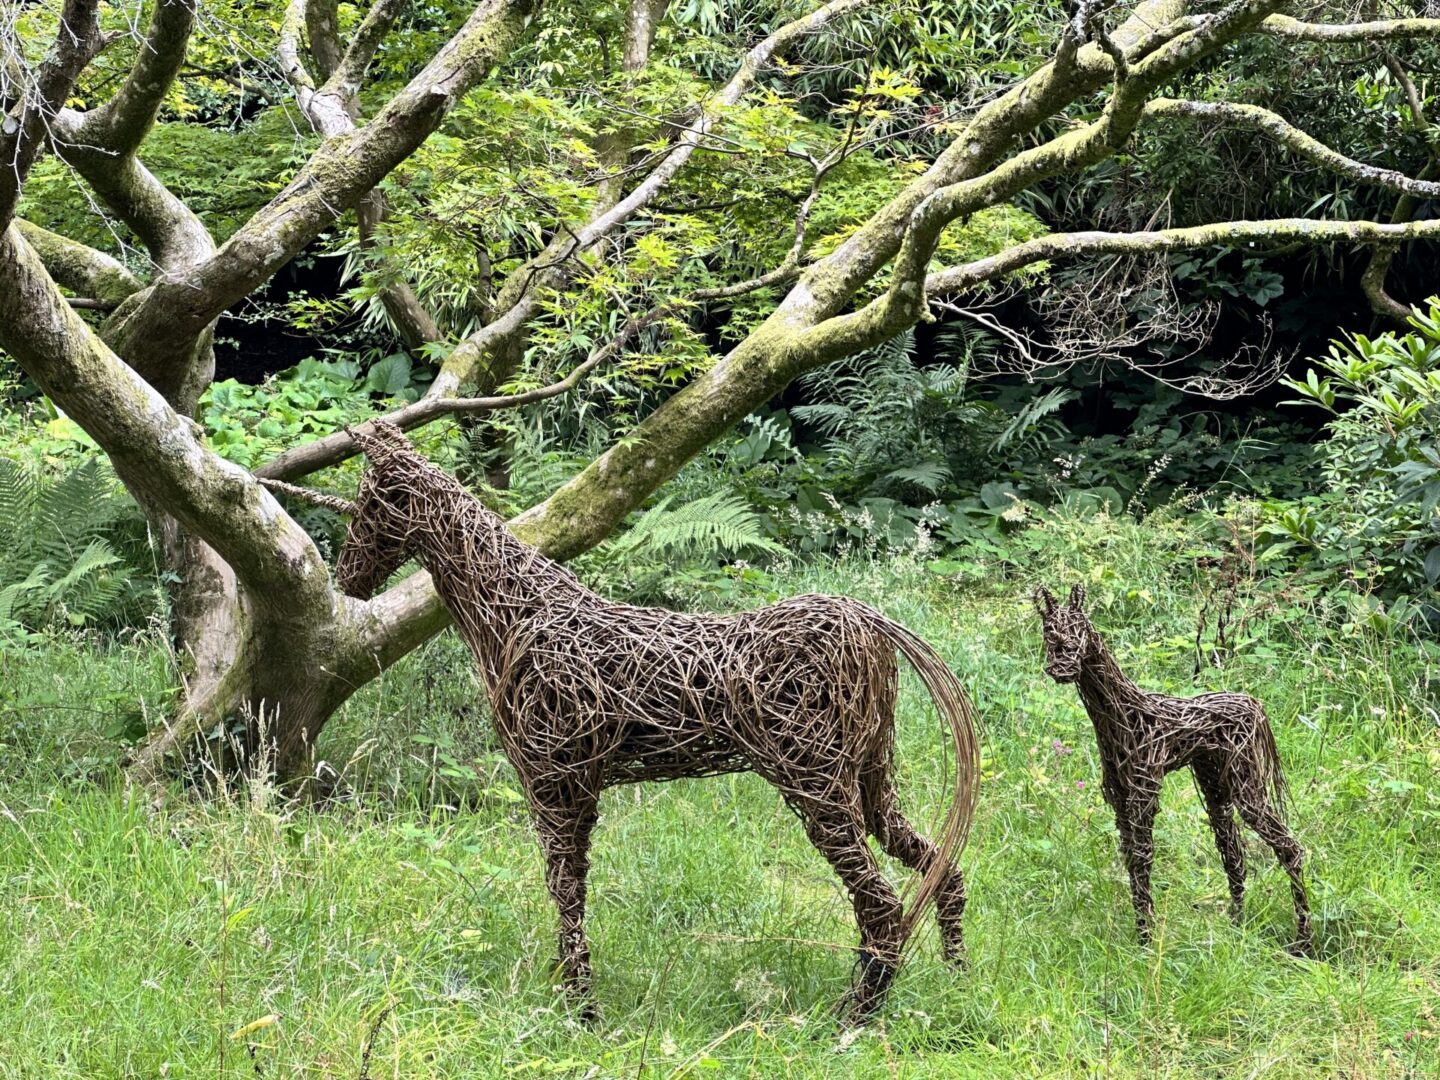 A pair of horses made from branches in the grass.